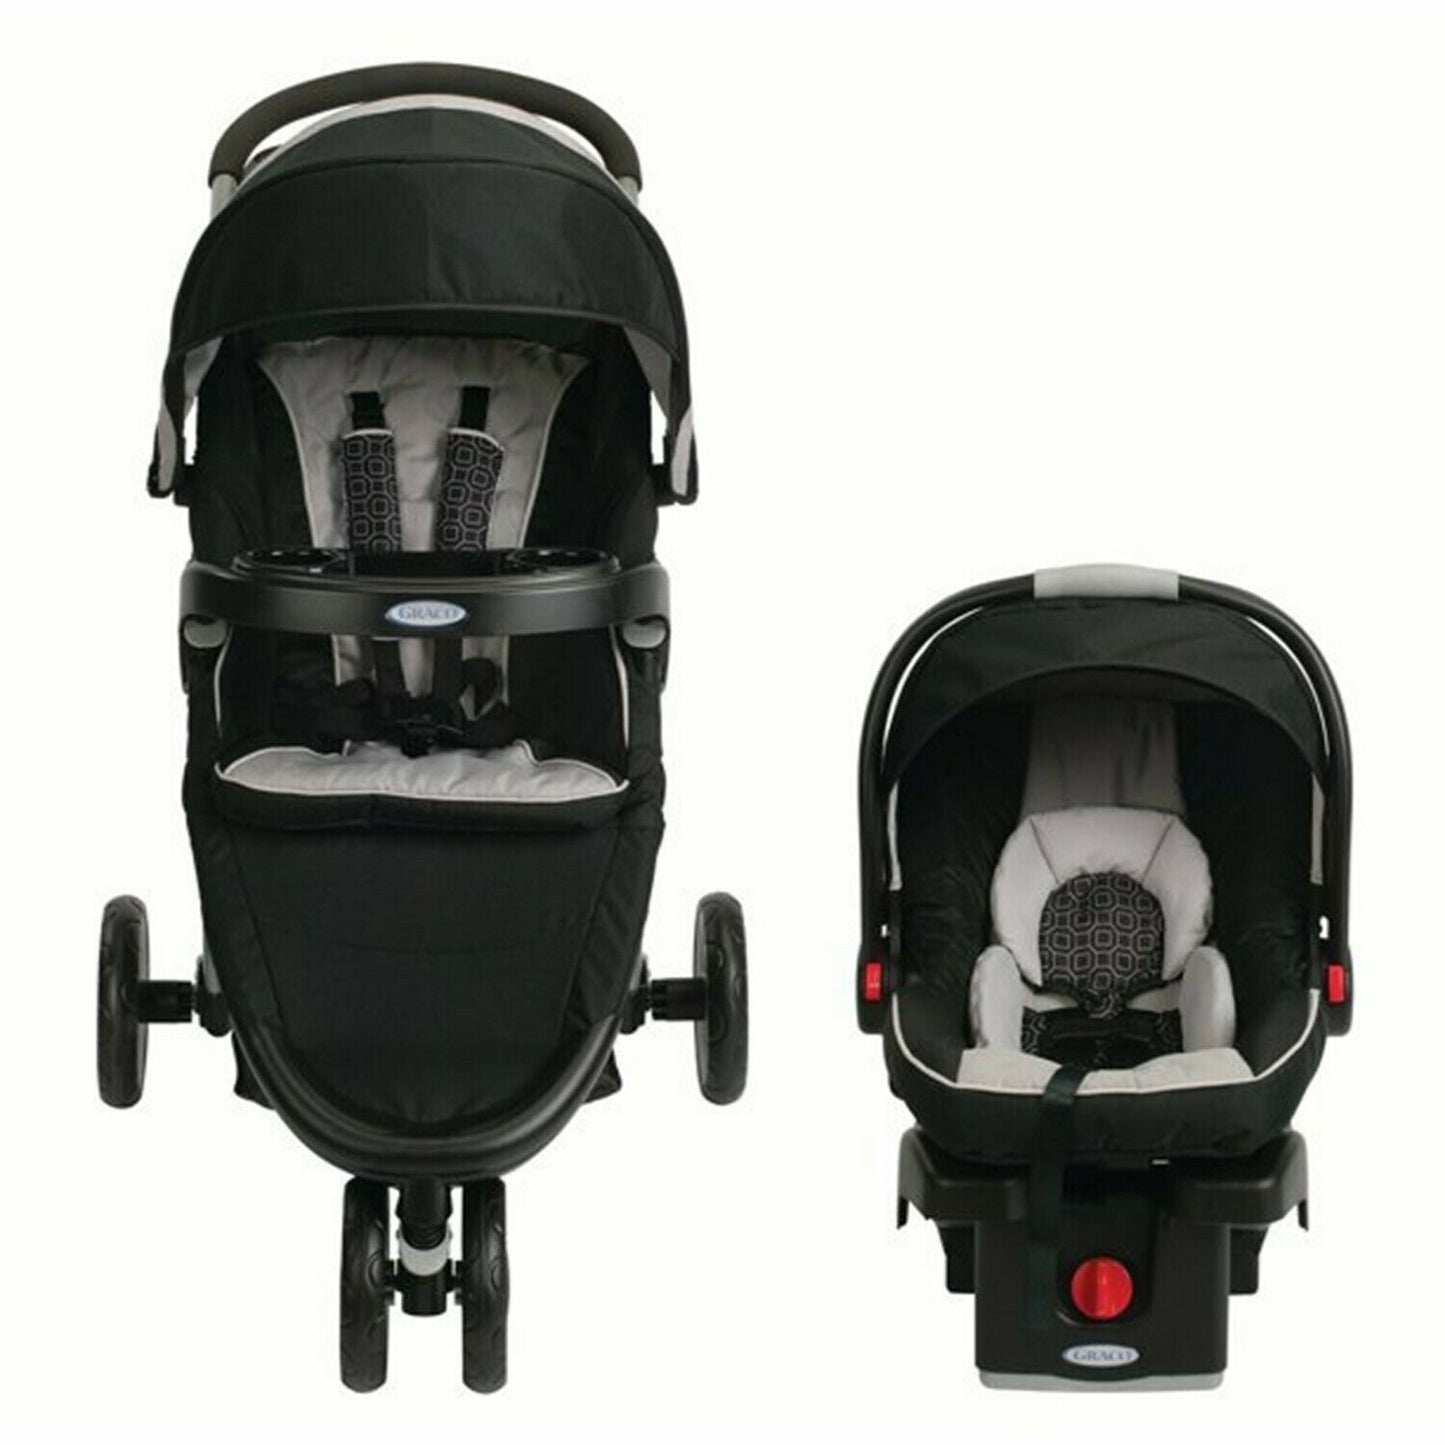 Baby Stroller with Car Seat Travel System Playard High Chair Combo Graco Black